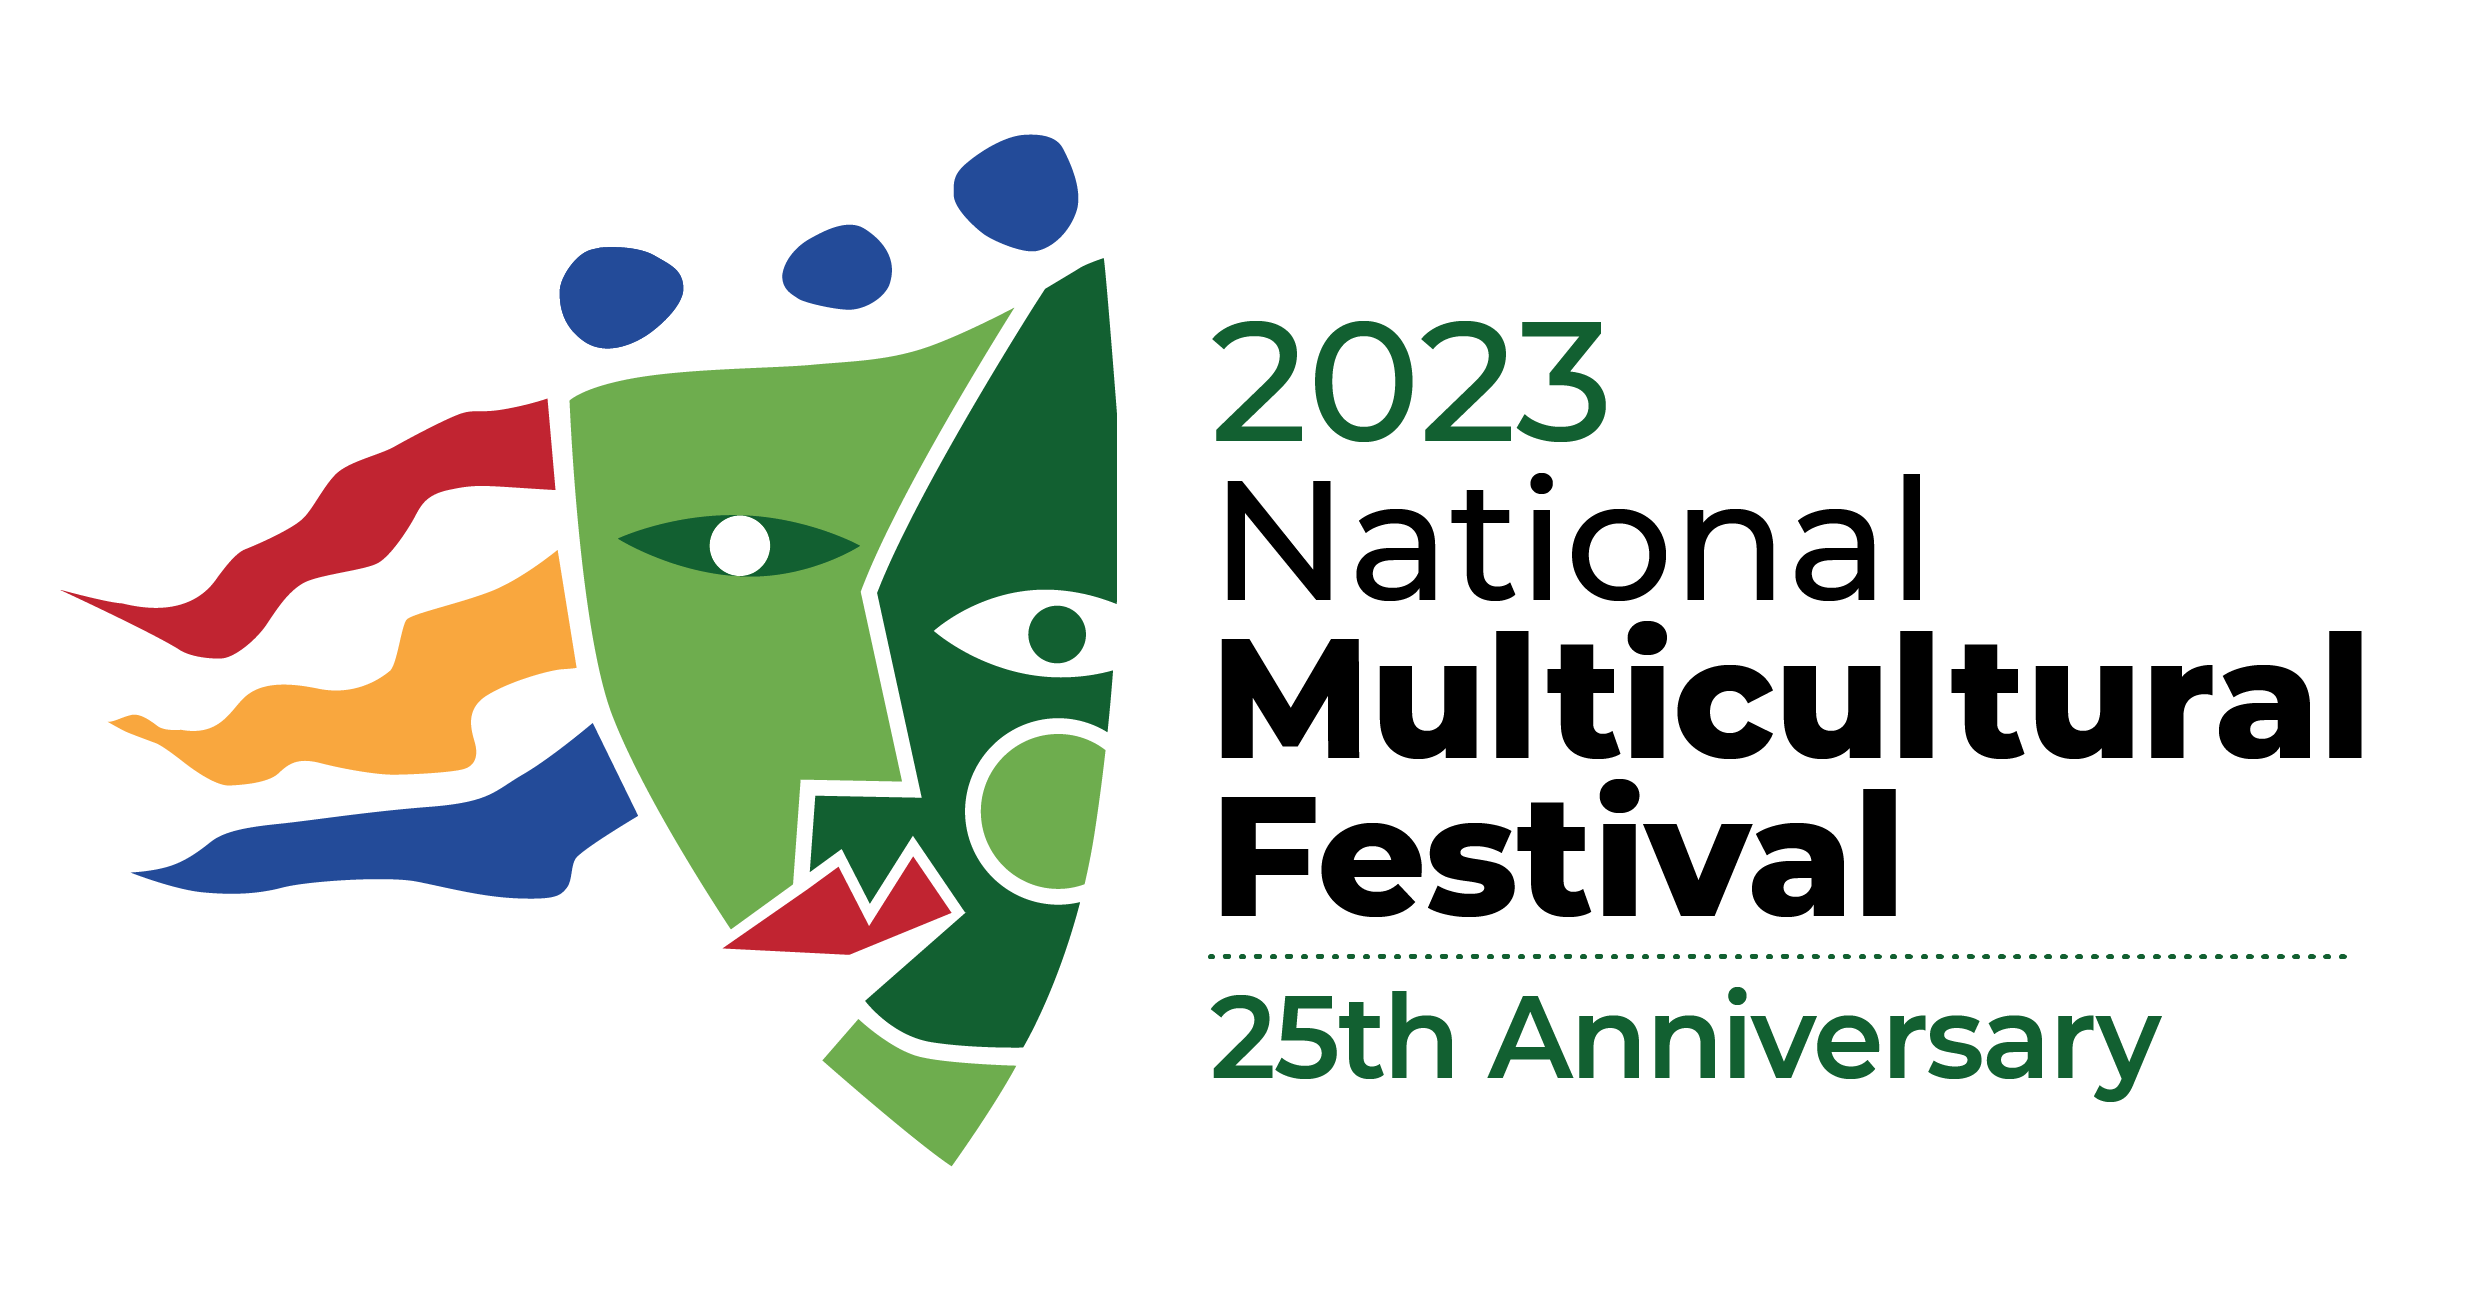 Multicultural%20Festival%20Logo%202022_25th%20Anniversary_Col.png